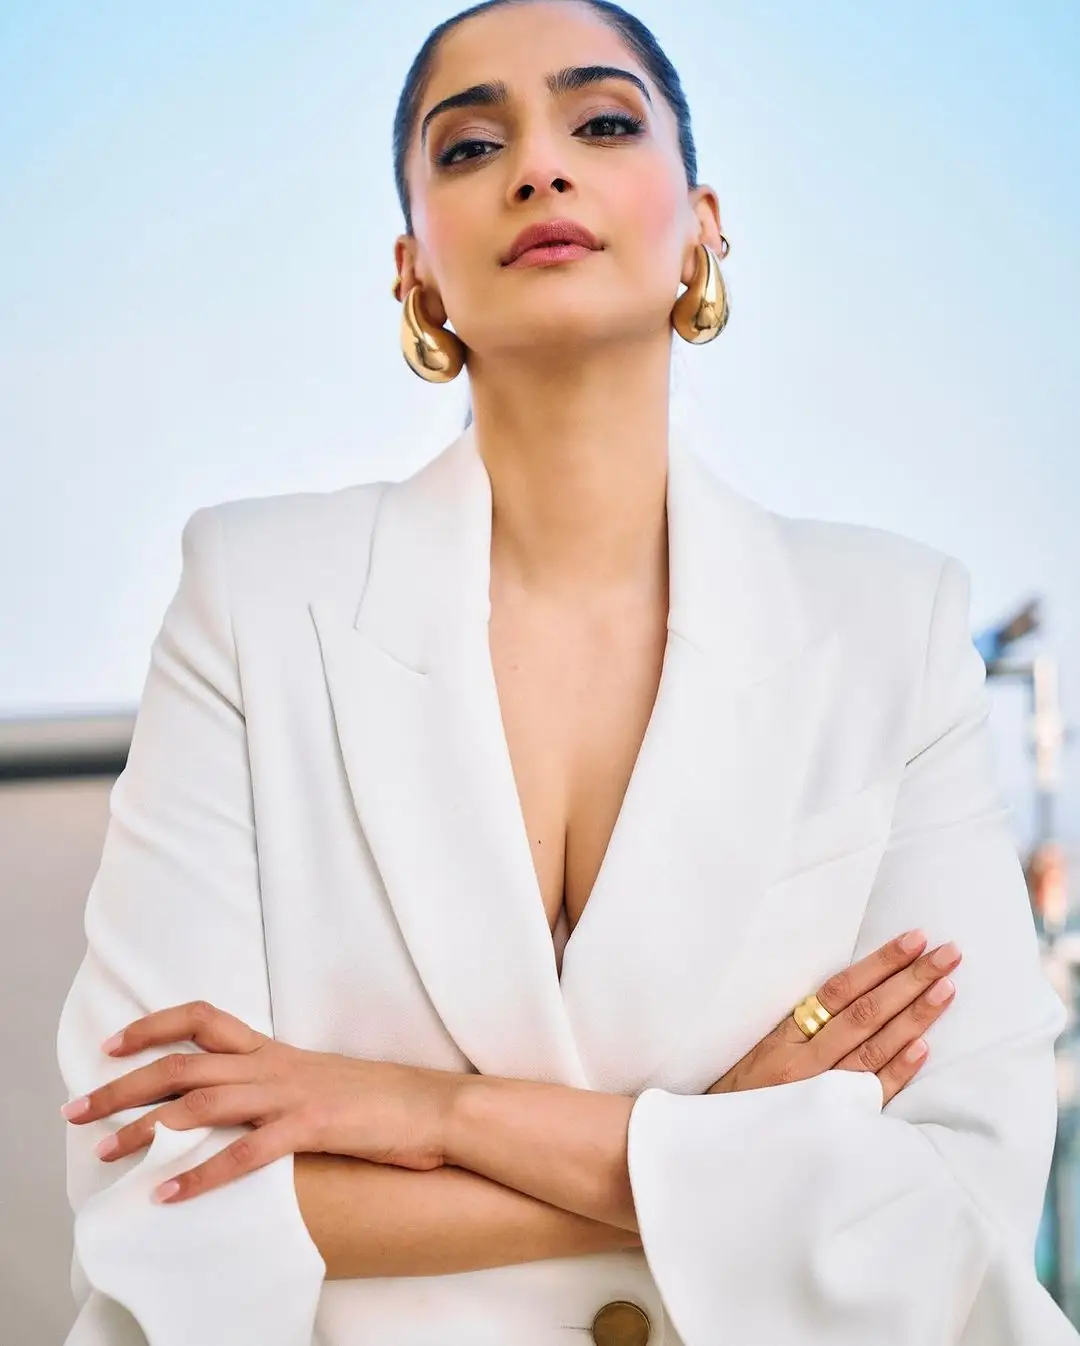 BOLLYWOOD ACTRESS SONAM KAPOOR PHOTOSHOOT IN LONG WHITE TOP PANT 3